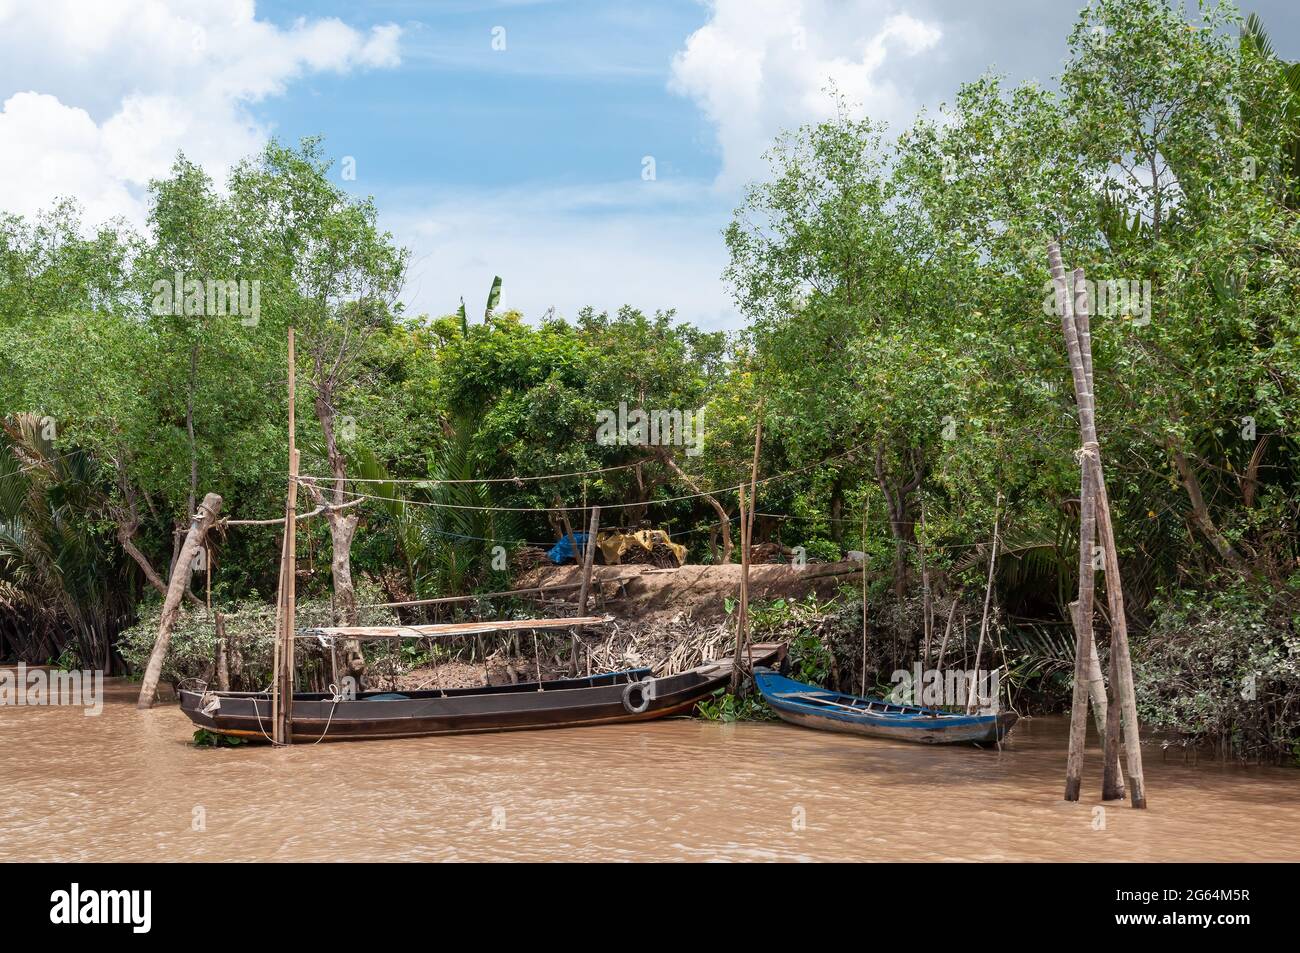 Wooden fishing boat docked on the Mekong Delta in Vietnam surrounded by green trees. Stock Photo